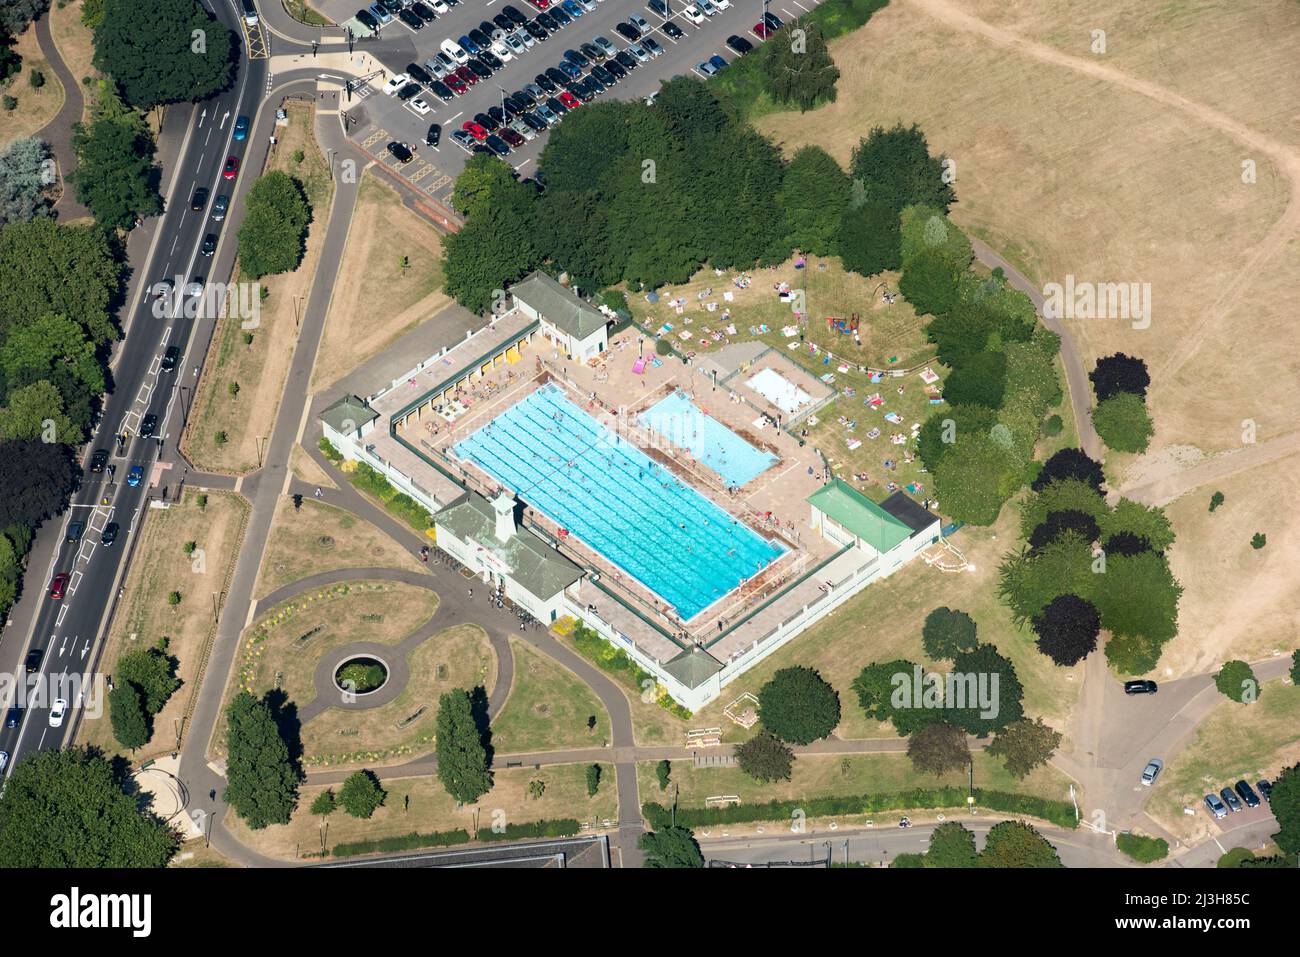 Peterborough Lido, first opened in 1936 and still in use today, Peterborough, Cambridgeshire, 2018. Stock Photo